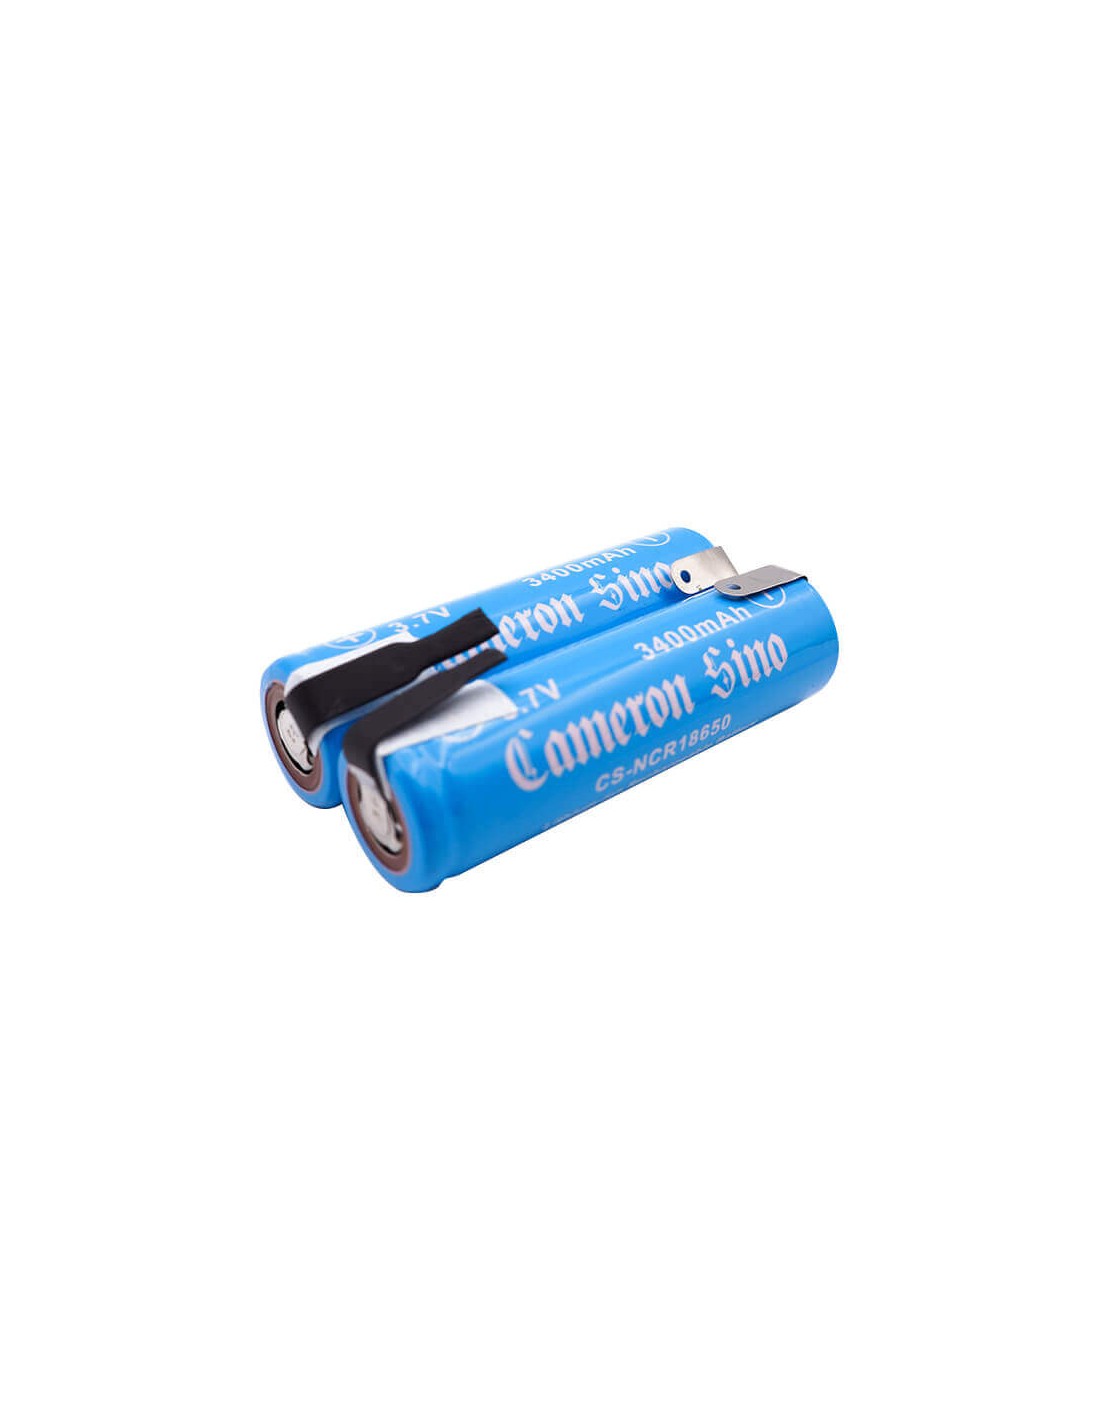 Battery for Lithium Ion, 2pcs Pack With Tabs 3.7V, 3400mAh - 12.58Wh